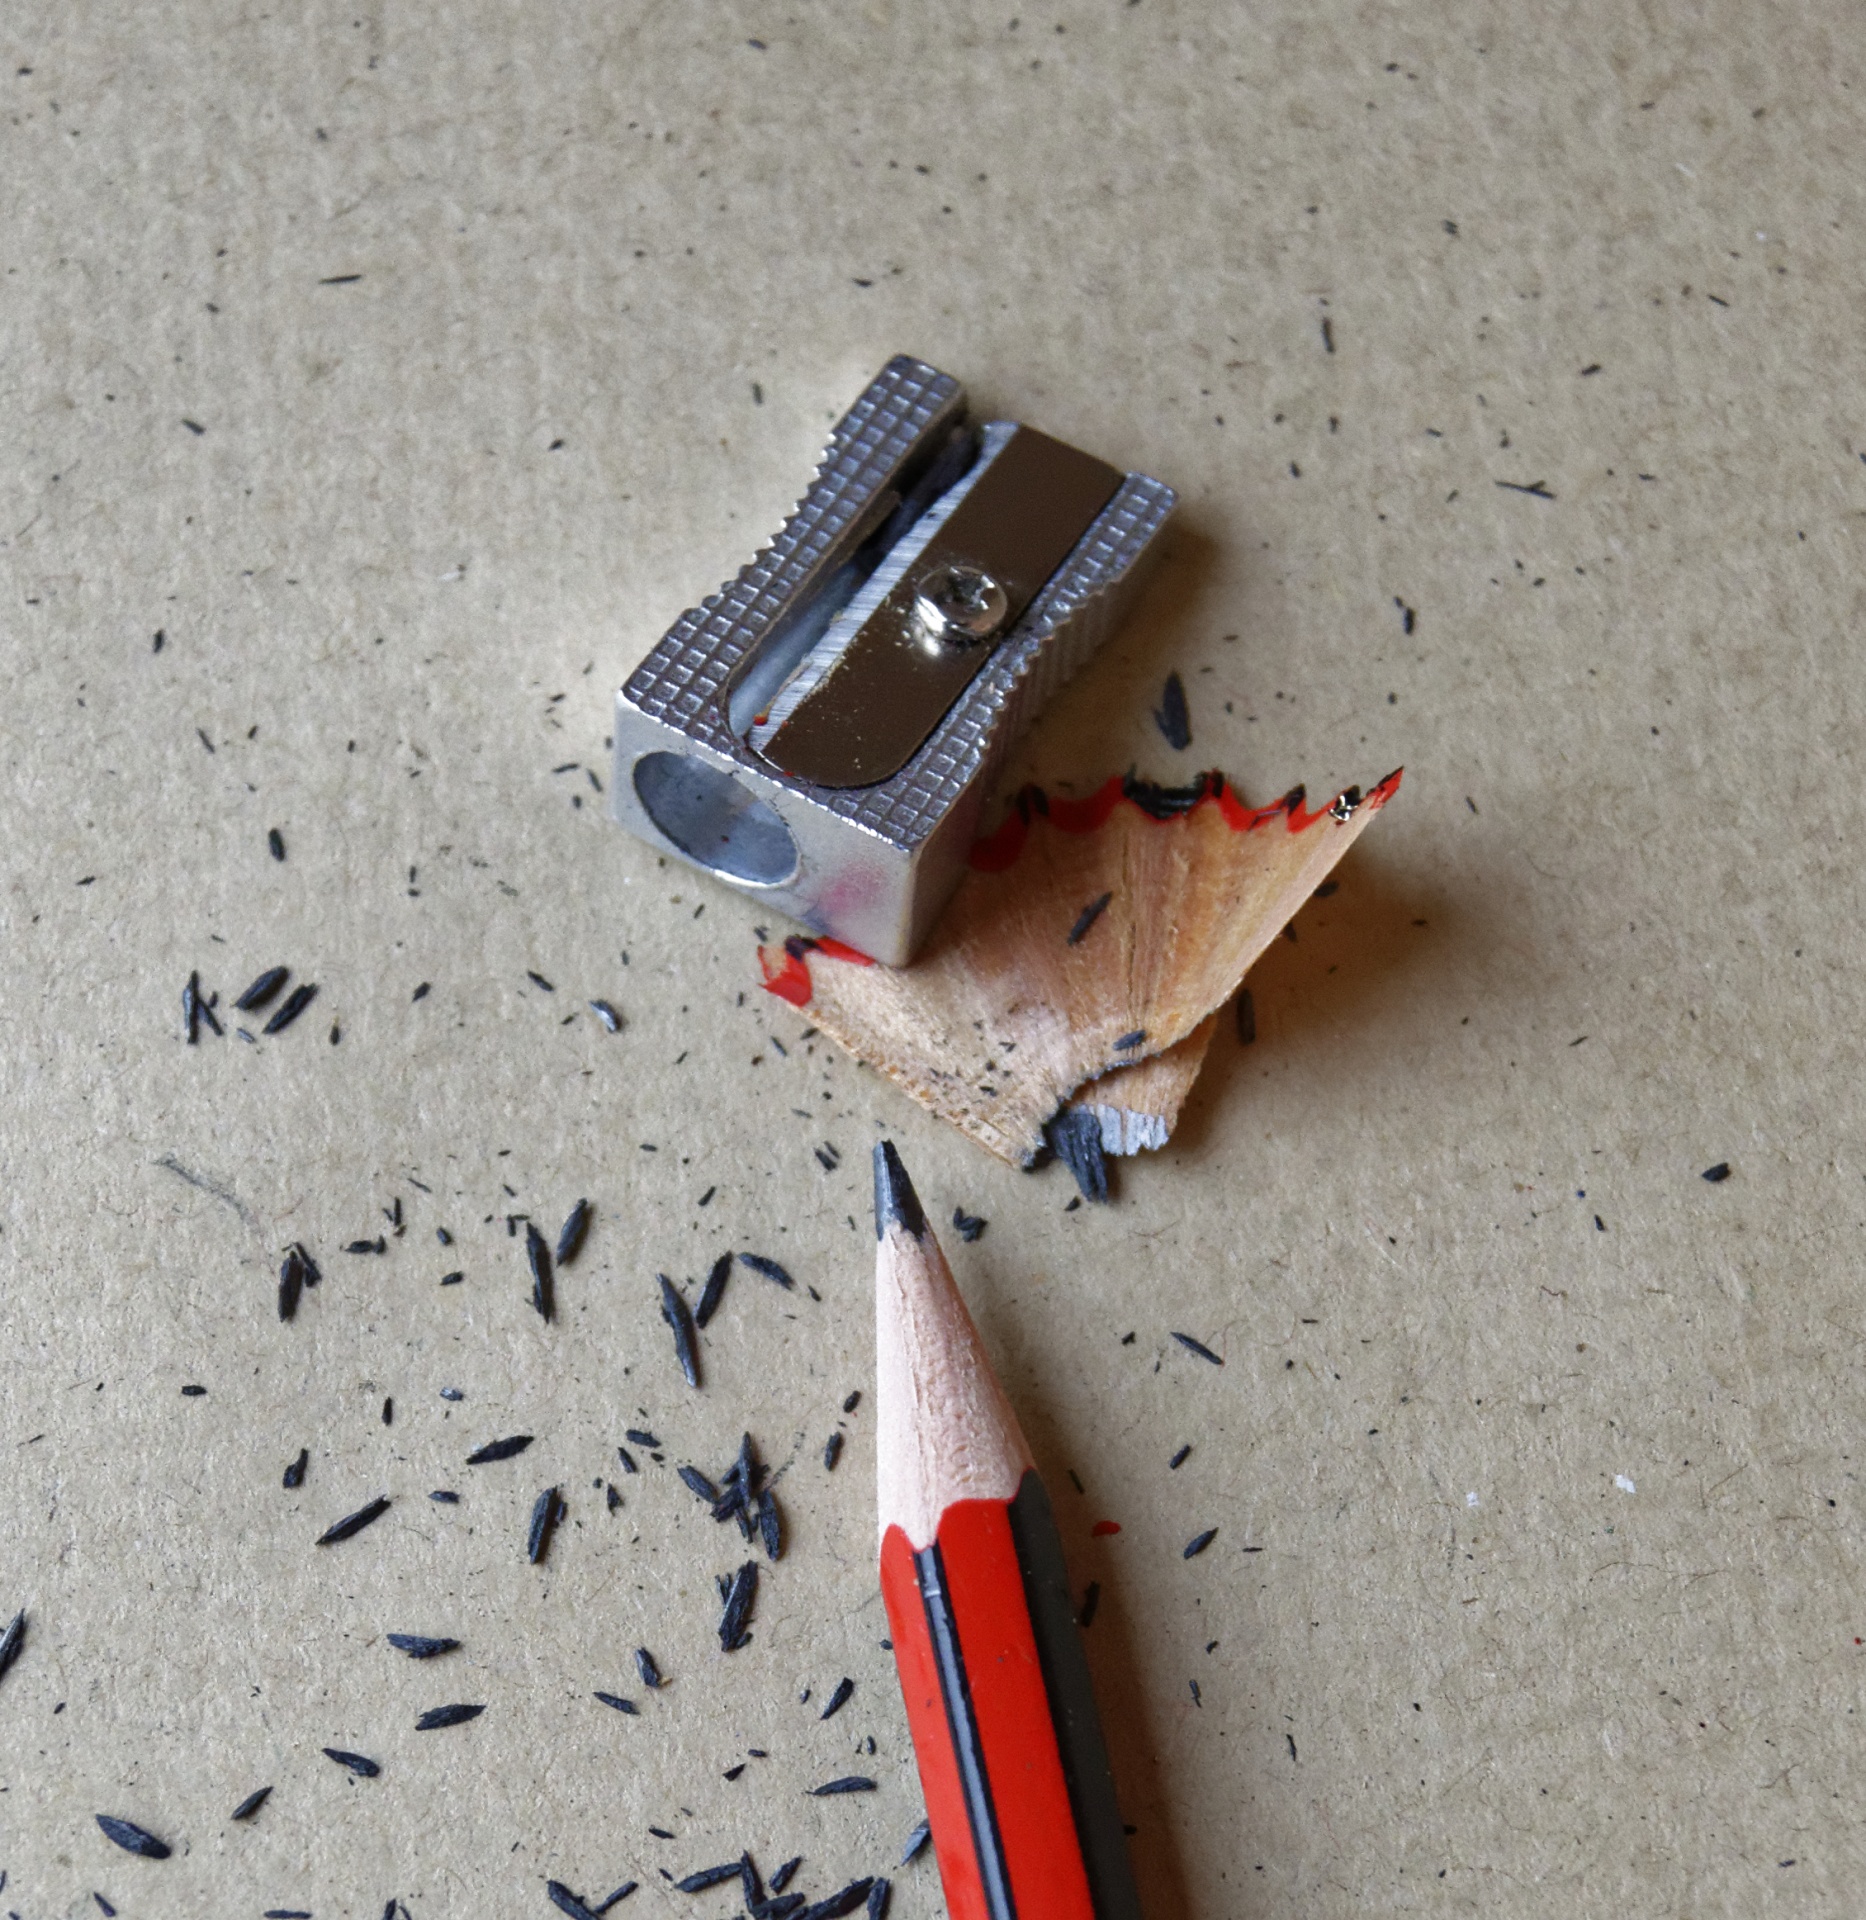 Pencil and pencil Sharpener with shavings